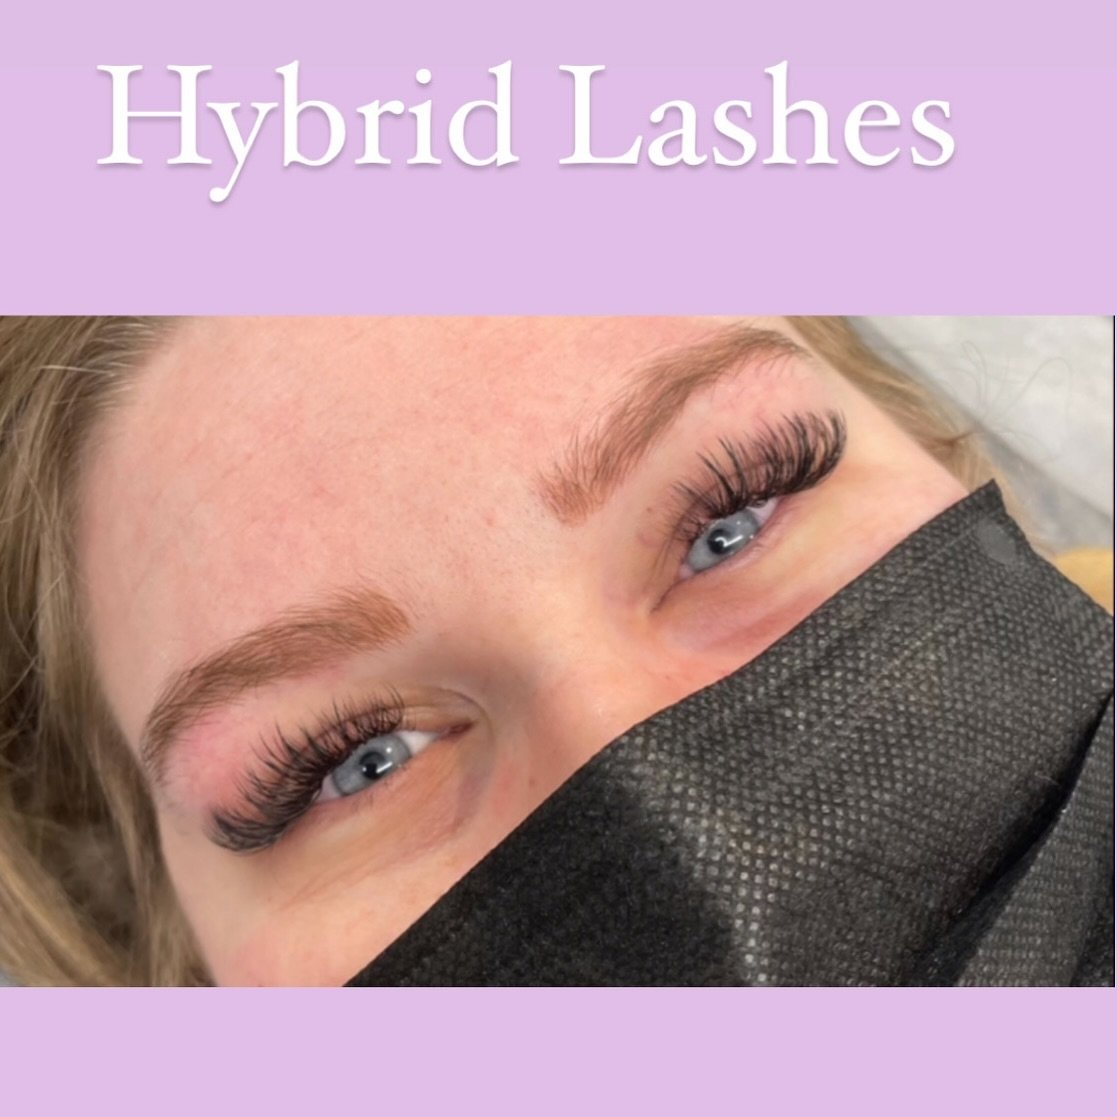 Spring is here! 🪷🌷🌻🪻
Wake up with LASHES! 
Hybrid Set by Andrea 
Link in Bio to Book! ✨✨✨
#hybrid
#hybridlashes
#hybridlashextensions
#lashextensions
#lashessd
#sdlashes
#sdlashartist
#lashboxla
#whispylashes